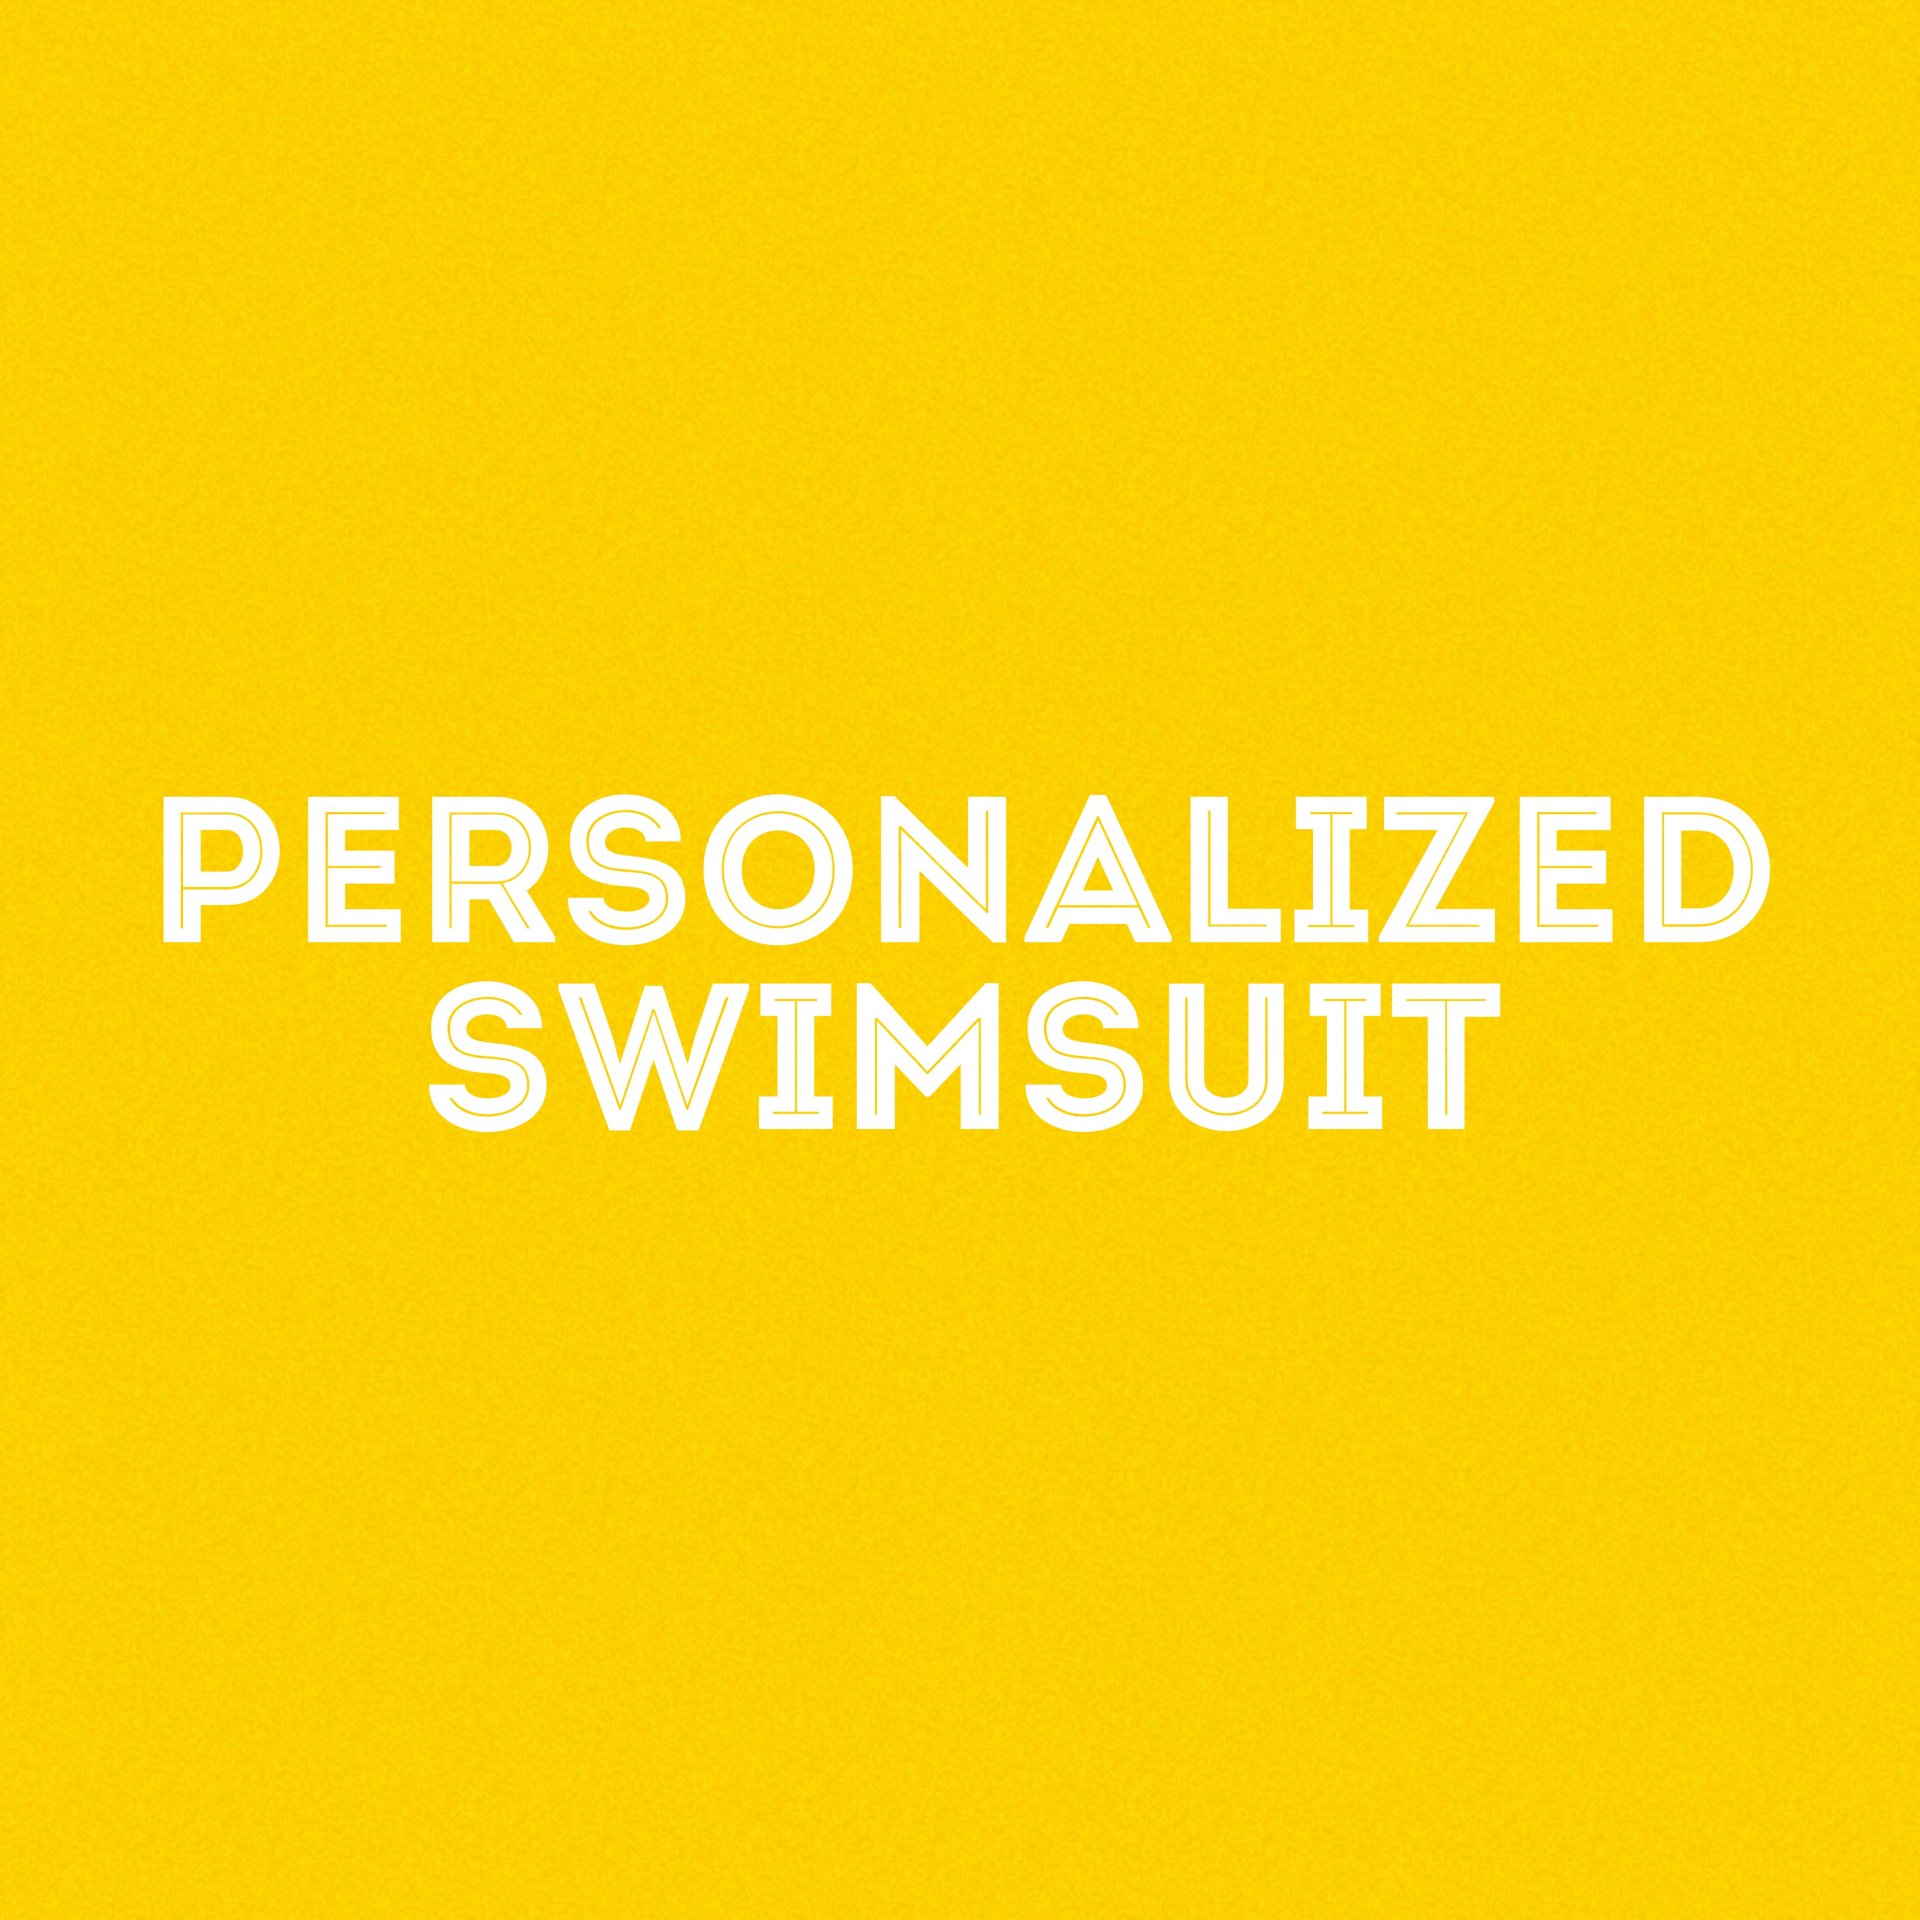 Personalized Swimsuits